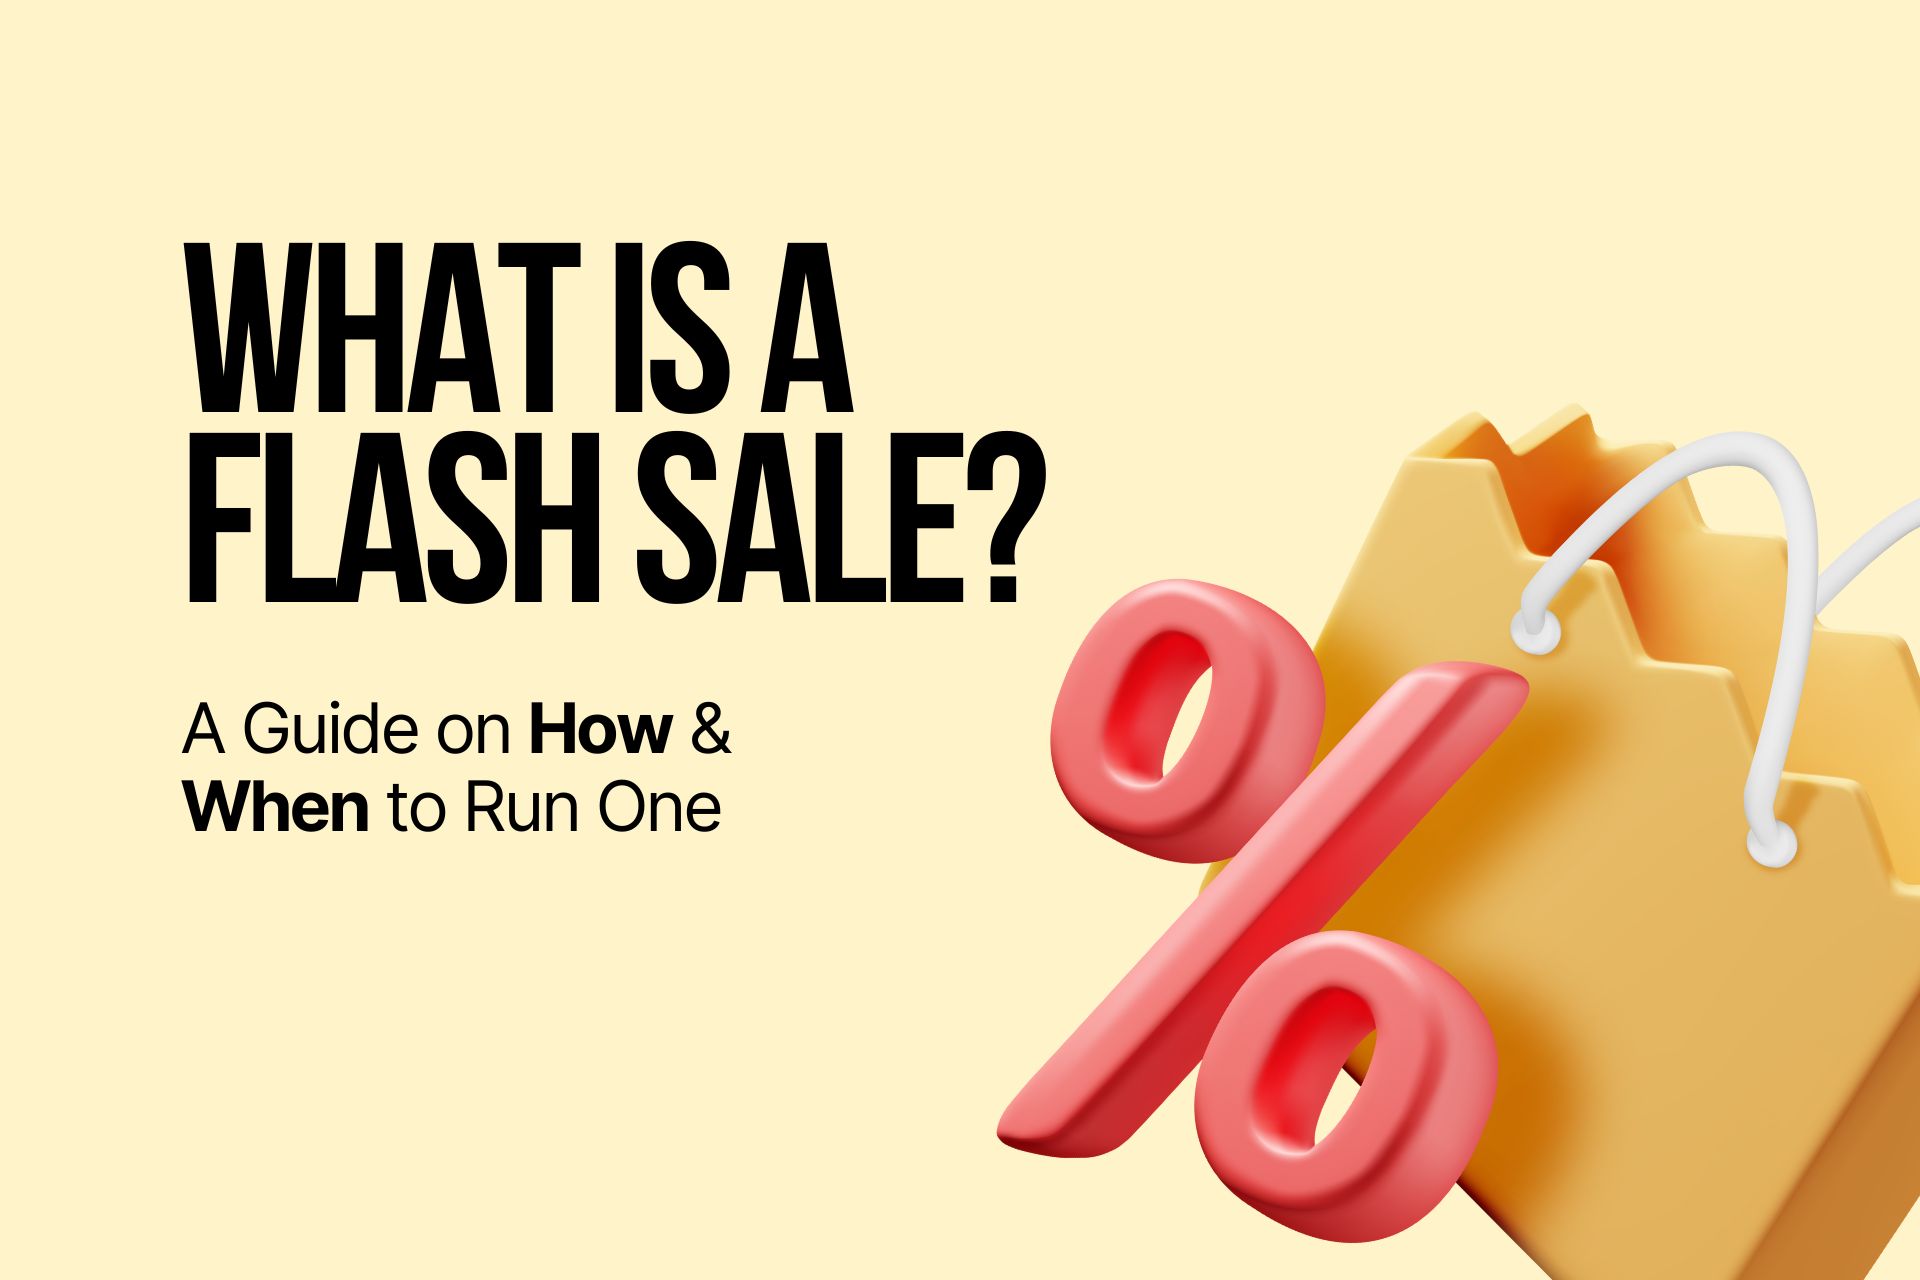 What is a Flash Sale? A Guide on How & When to Run One